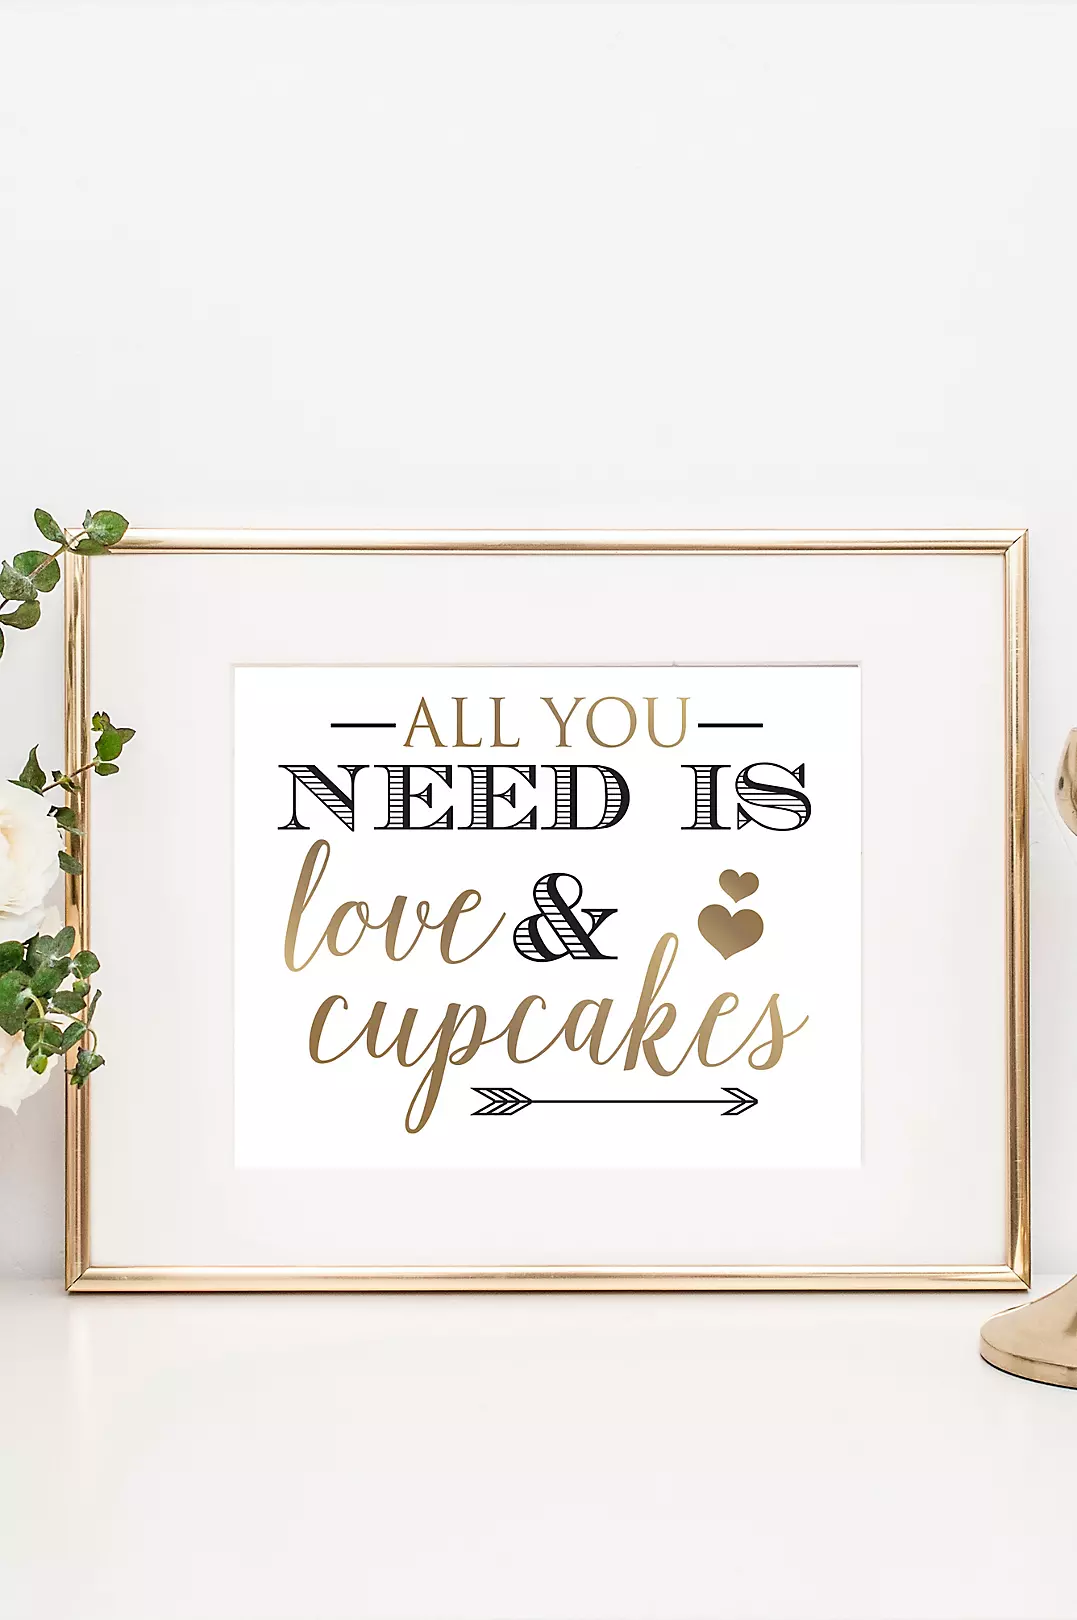 Love and Cupcakes Wedding Dessert Table Sign Image